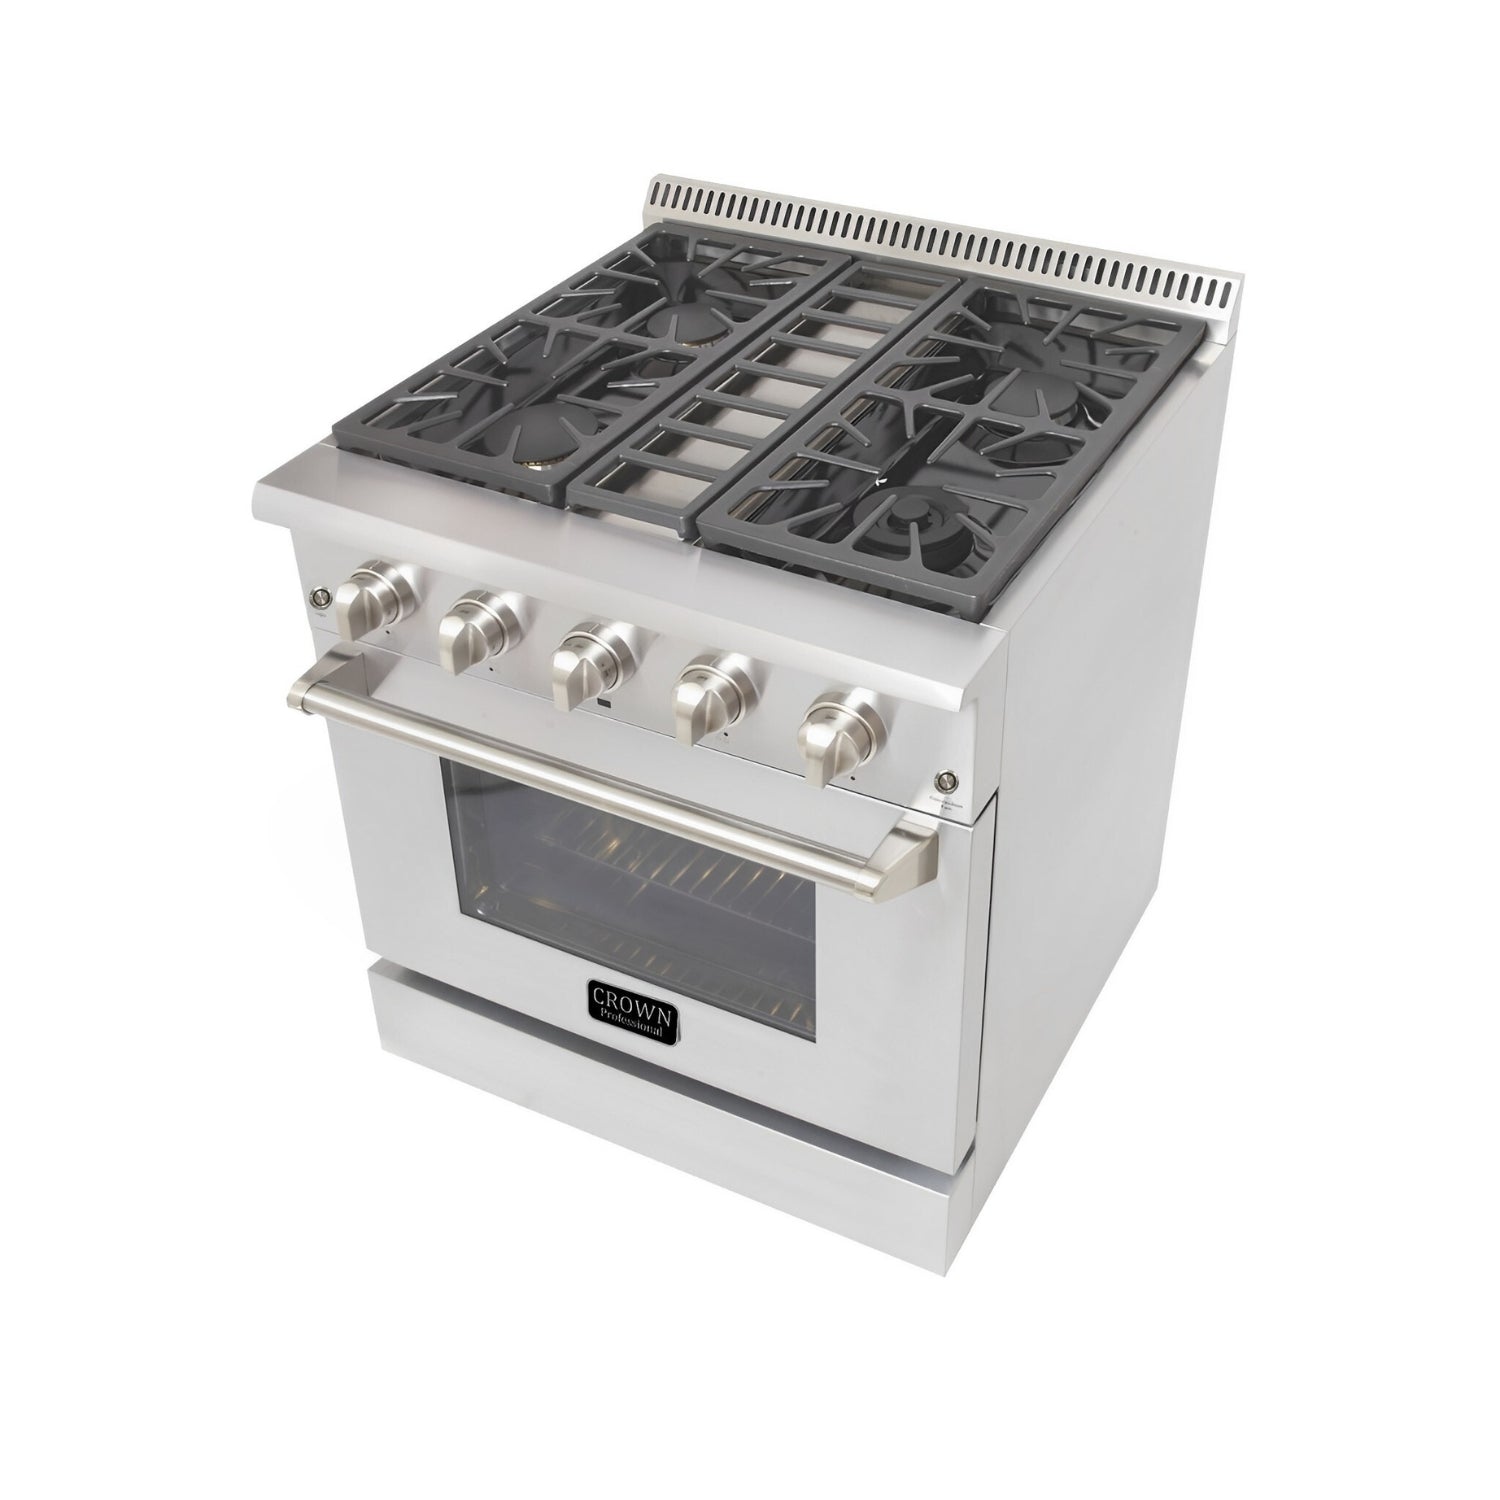 30" Crown Professional Stainless Steel Dual Fuel Gas Range ARD3001